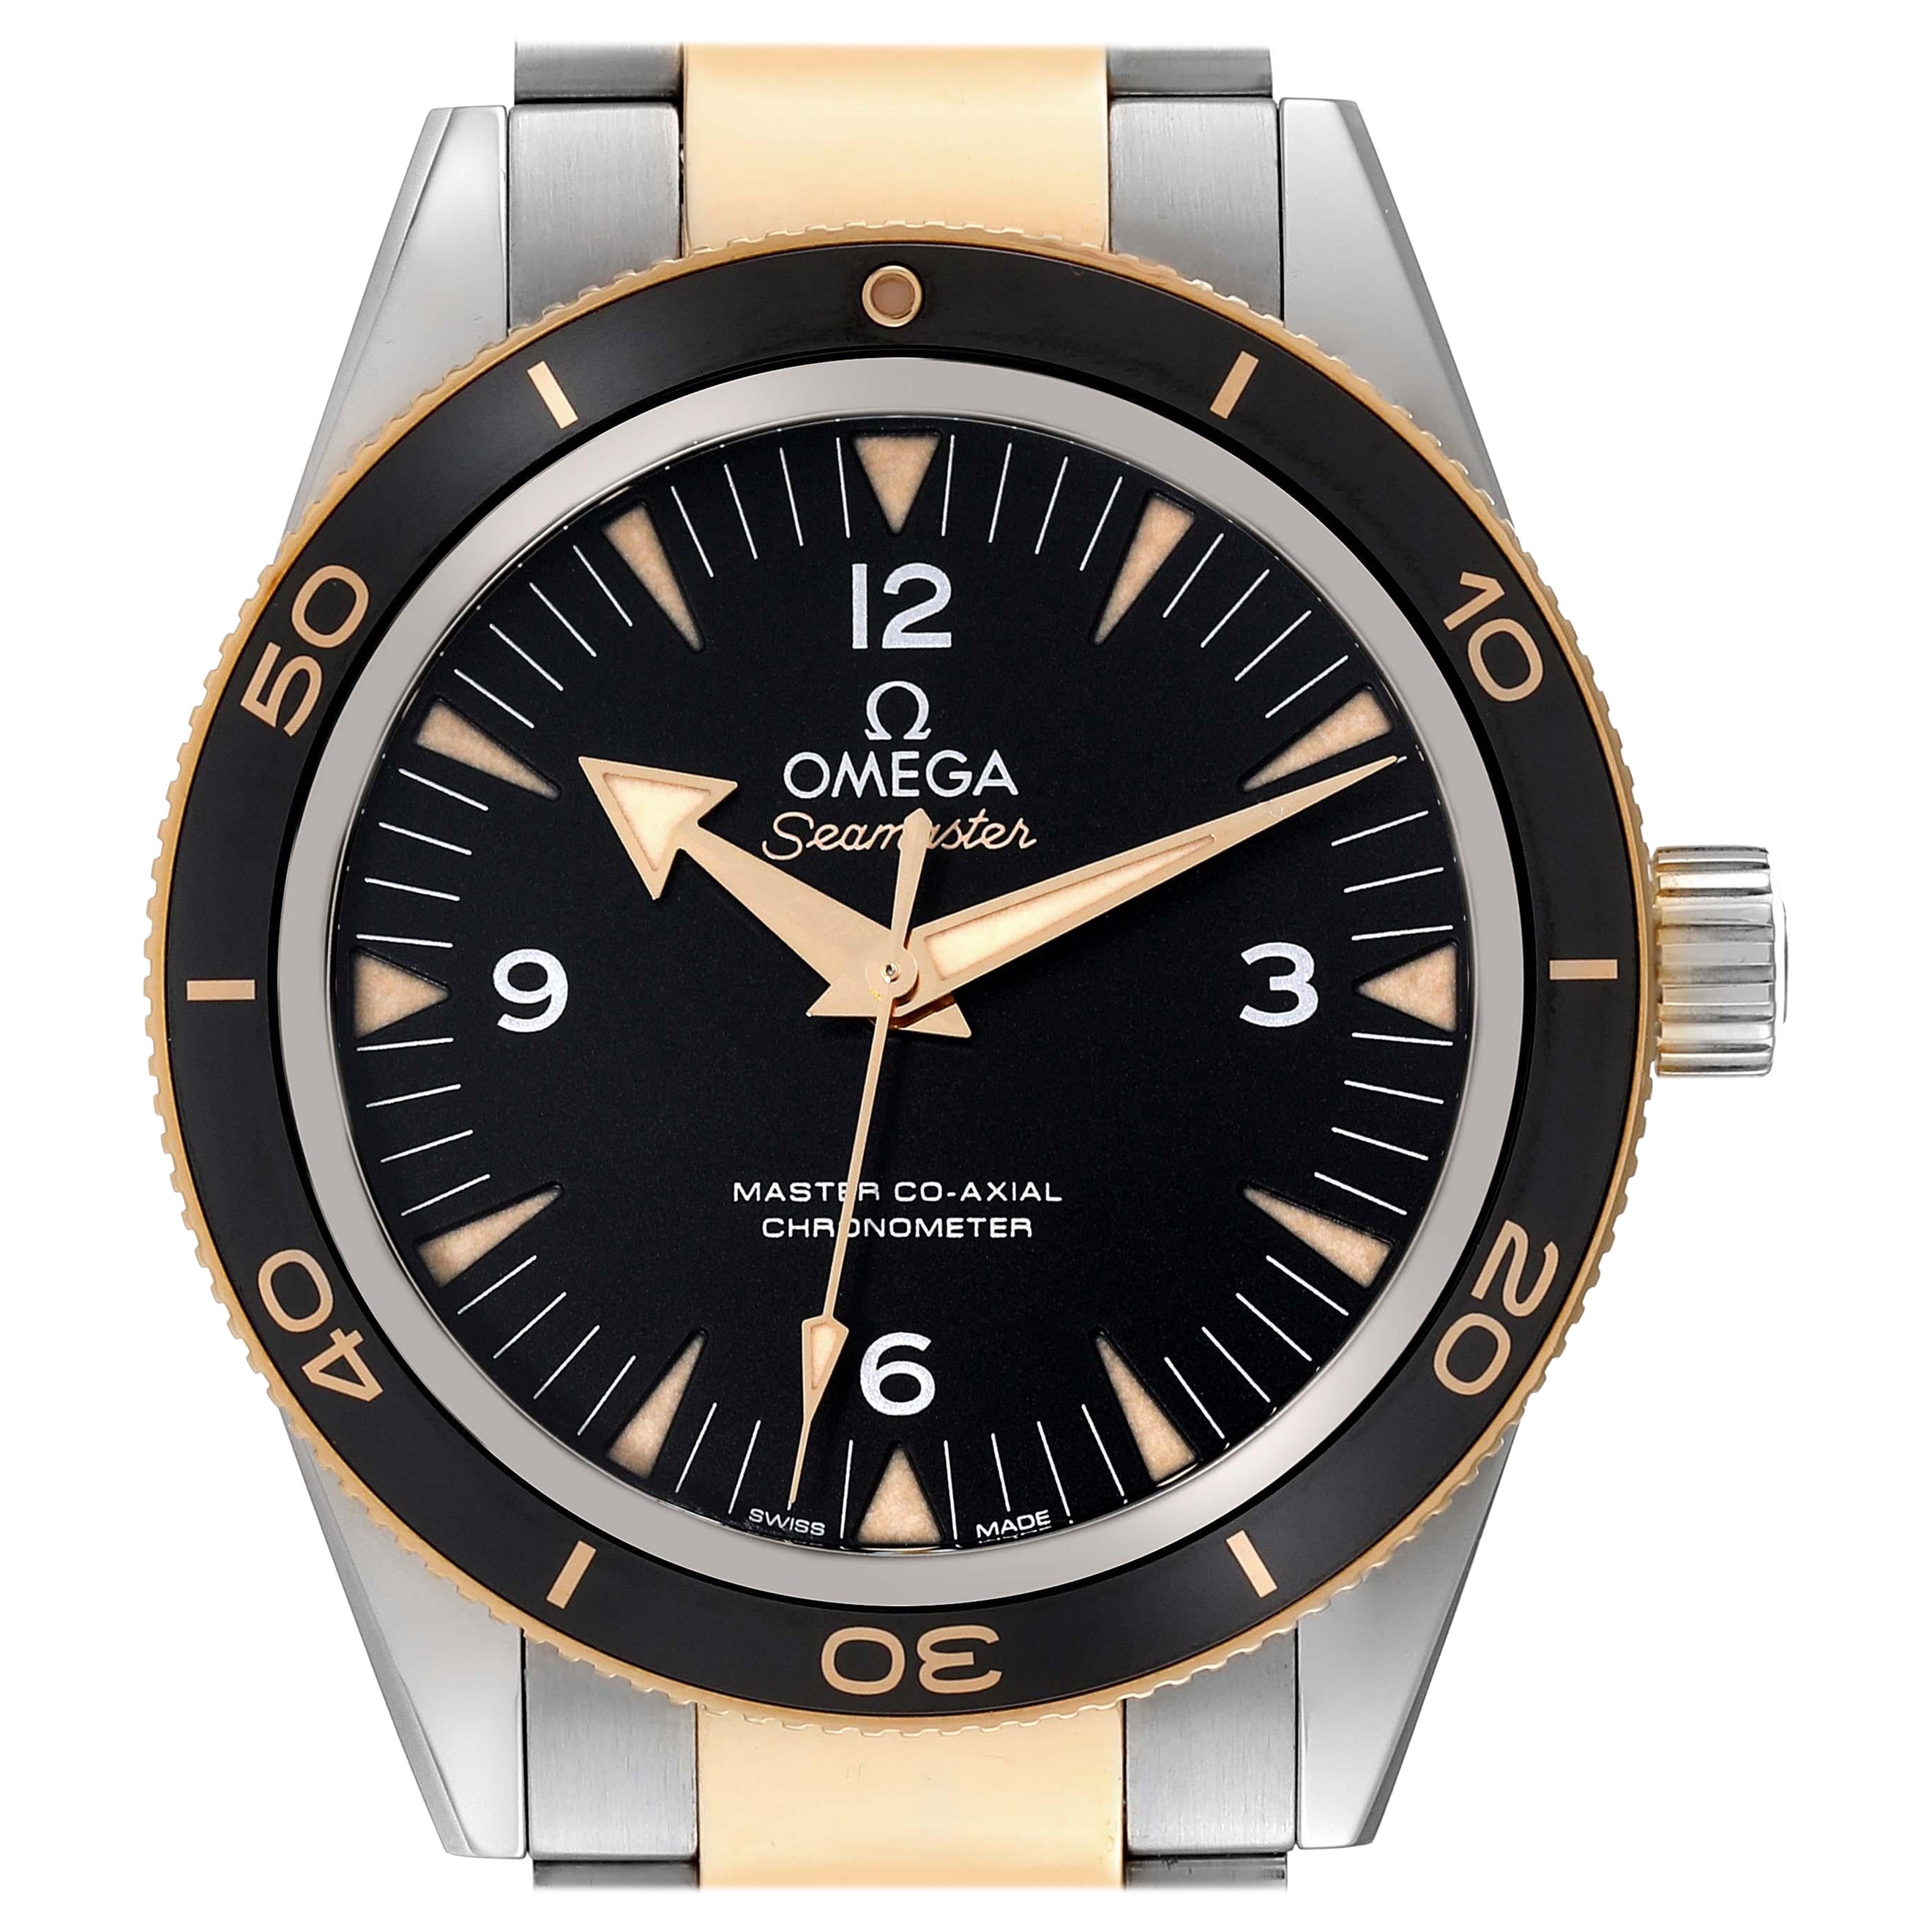 Omega Seamaster 300M Steel Yellow Gold Mens Watch 233.20.41.21.01.002 Card